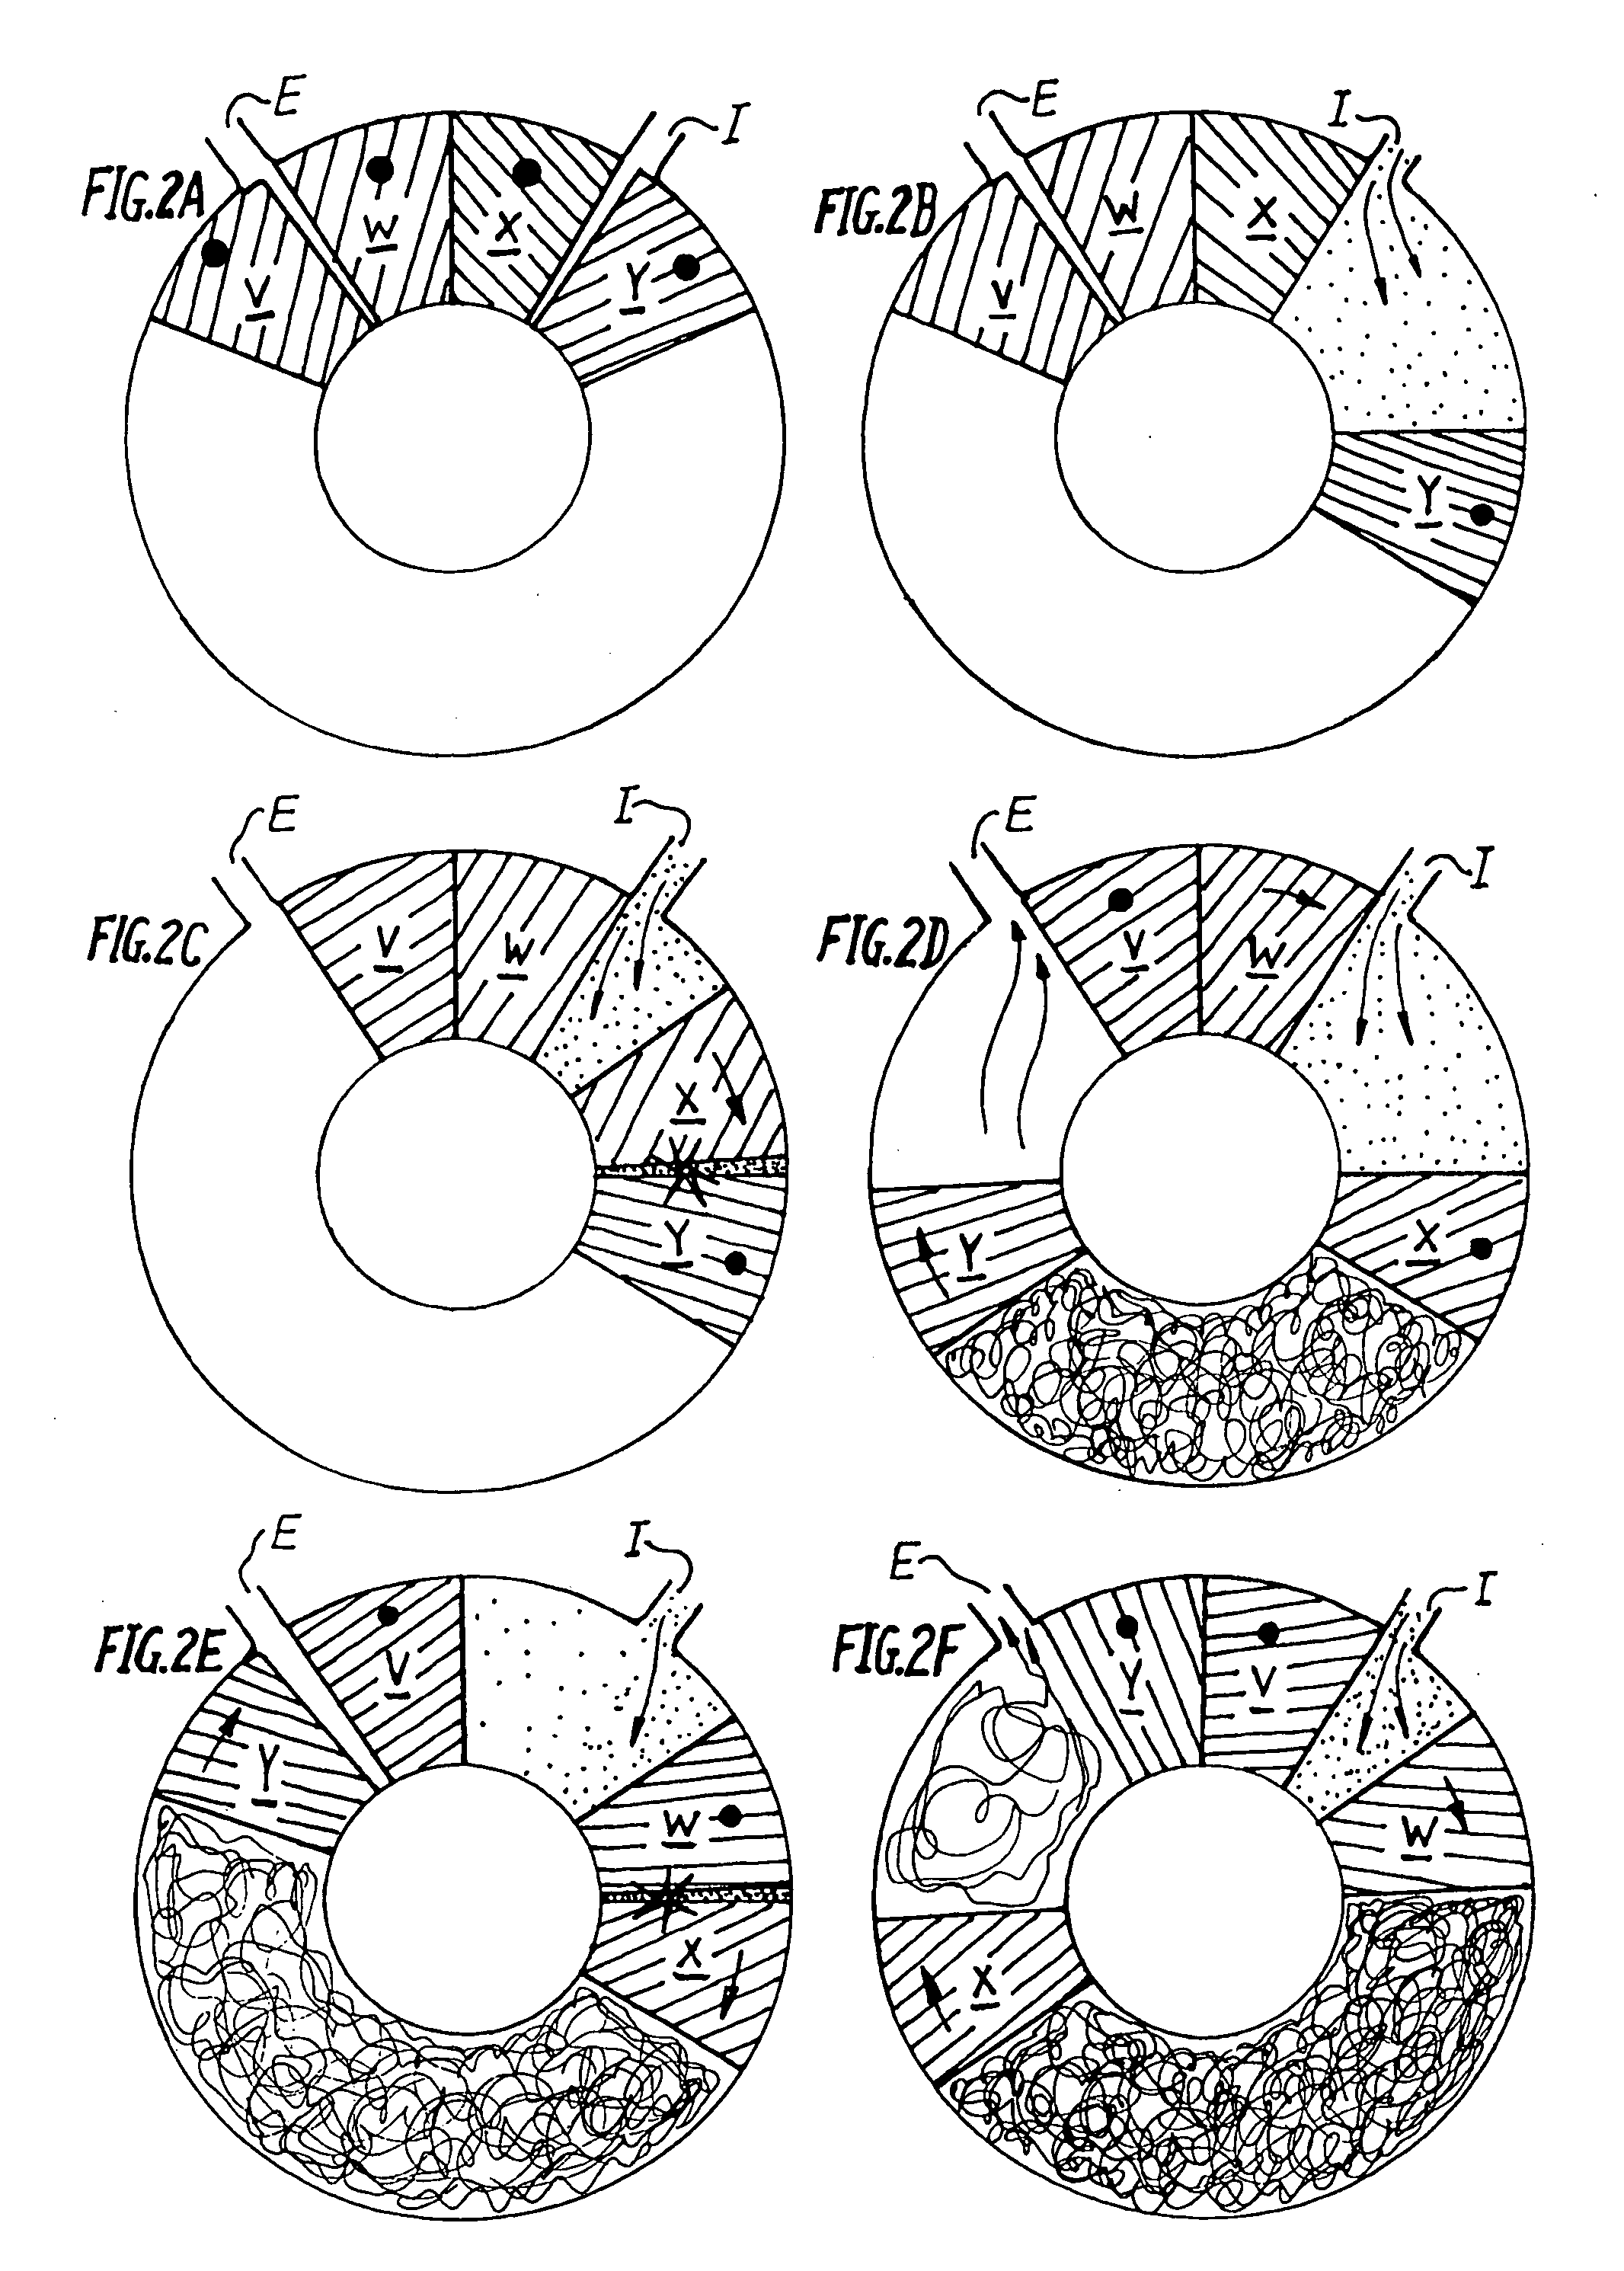 Relaying piston multiuse valve-less electromagnetically controlled energy conversion devices